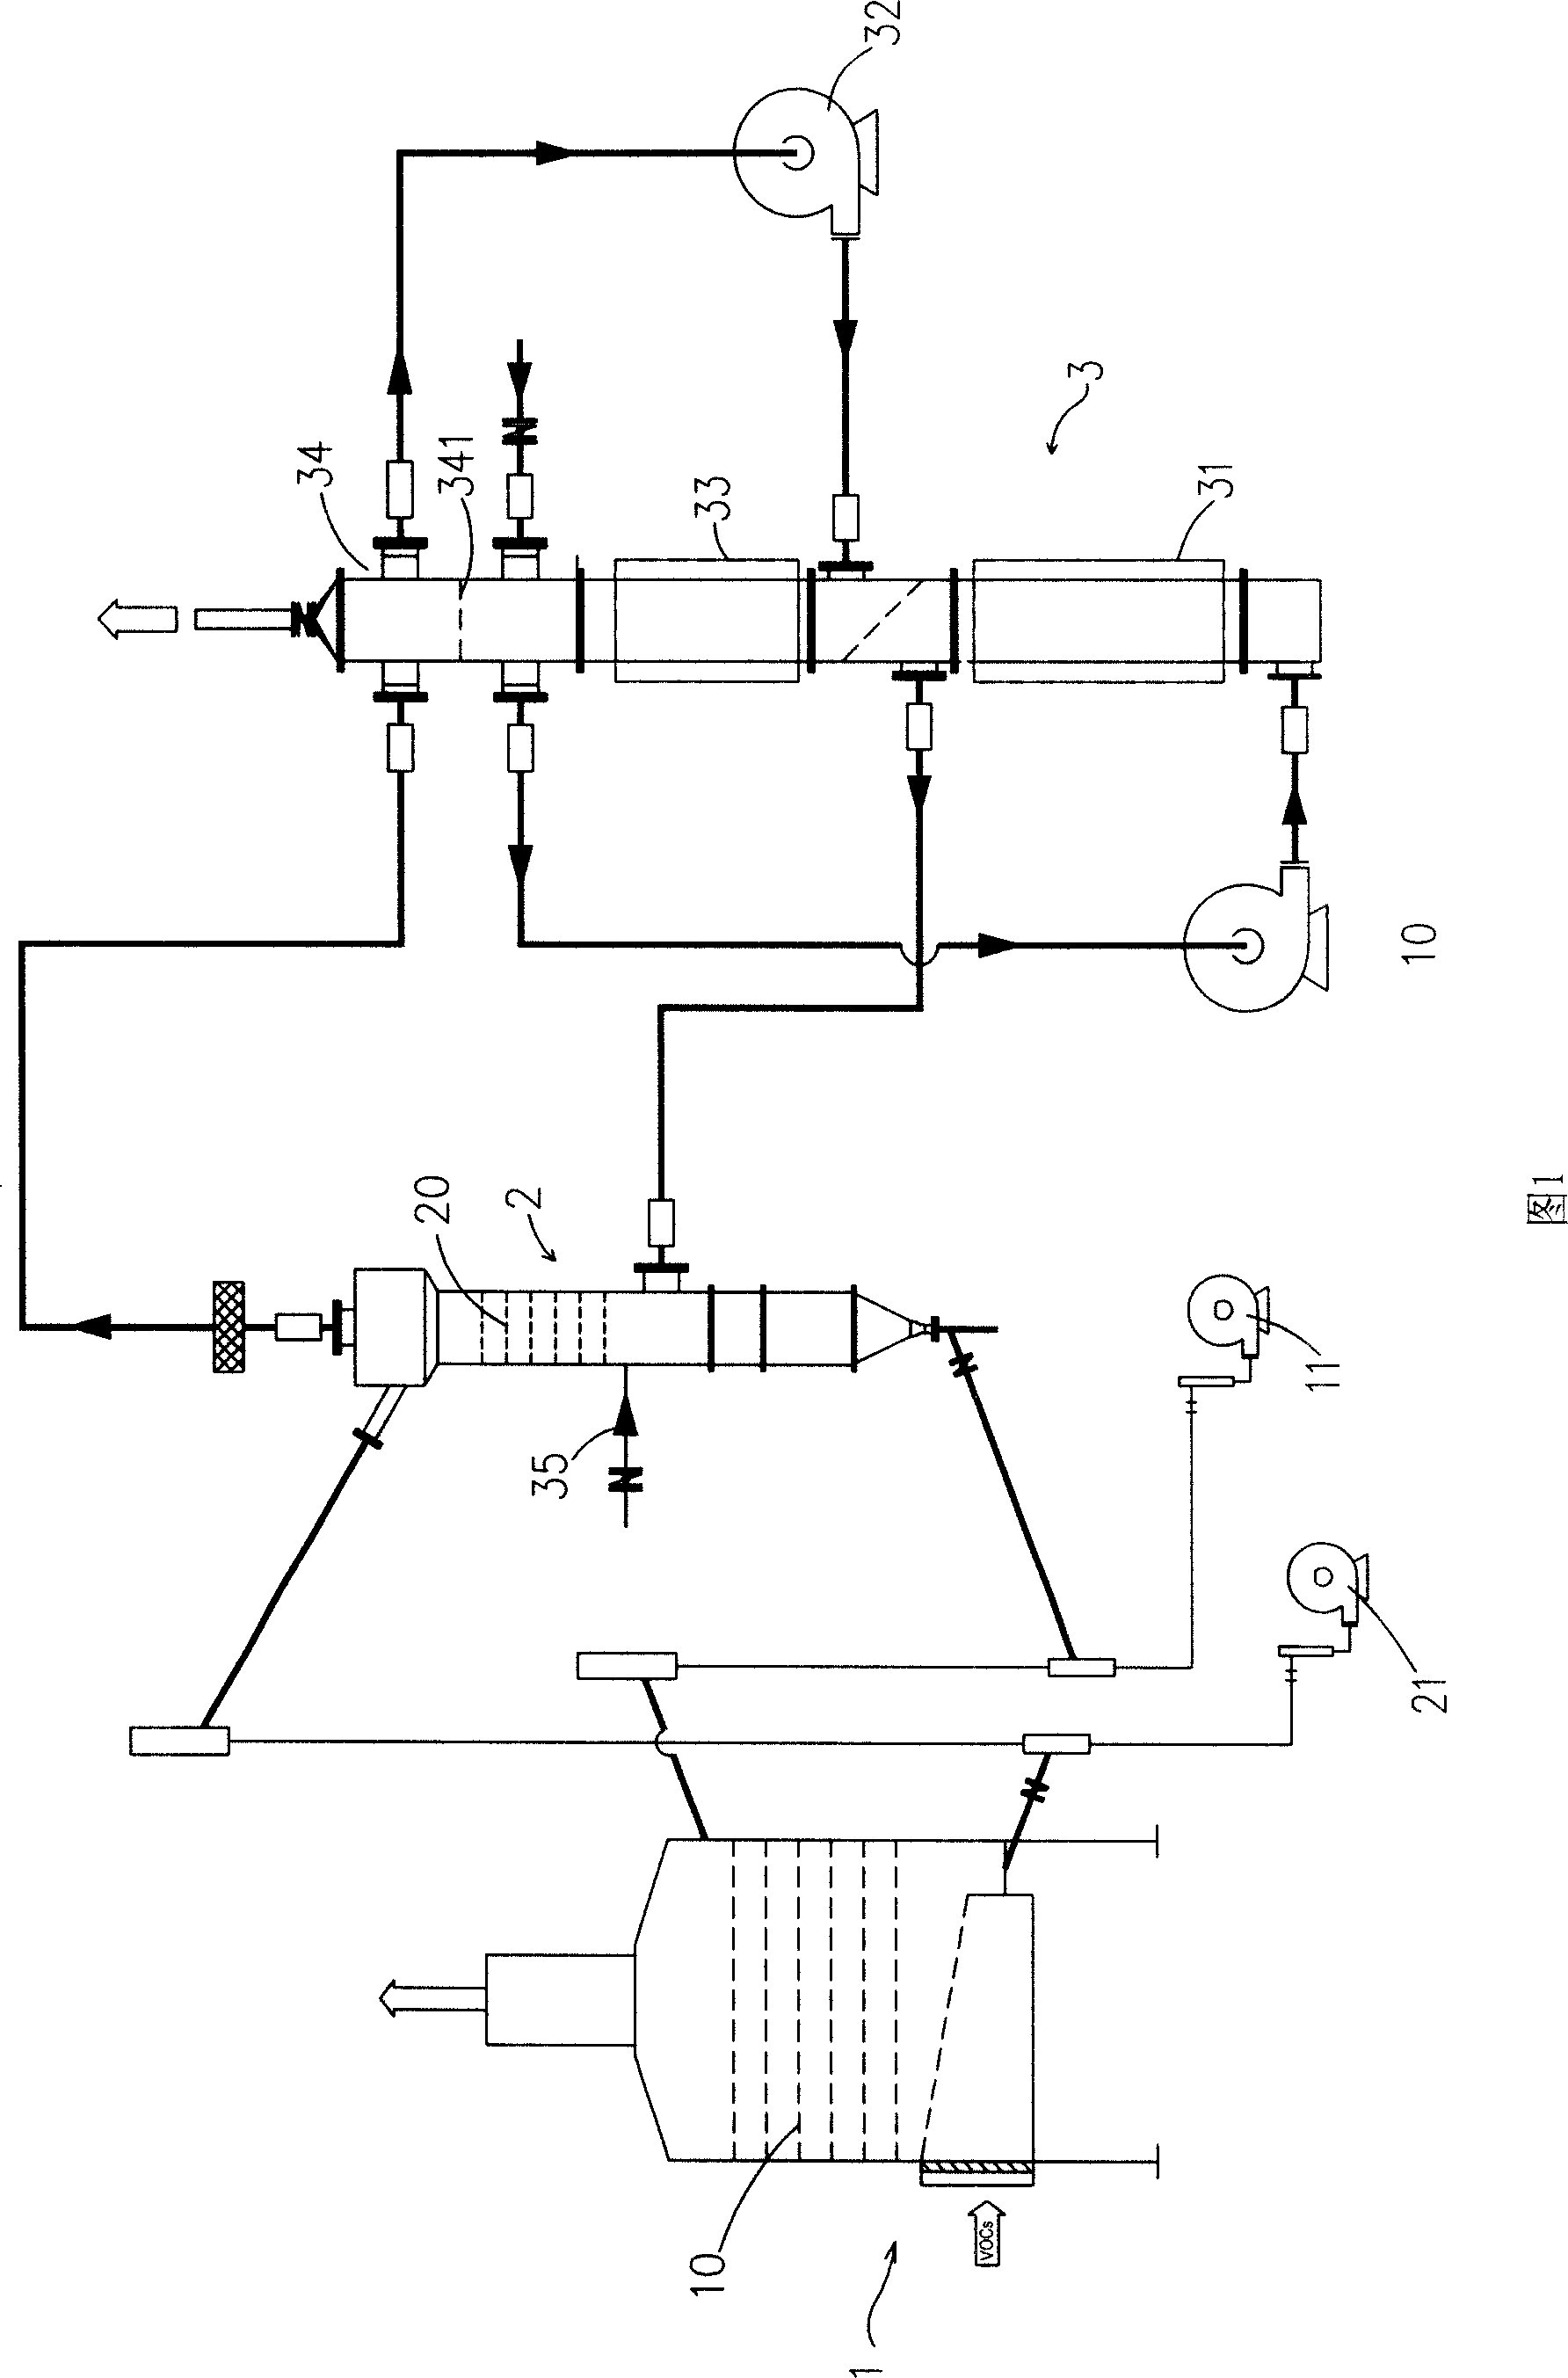 Absorption processing system of volatile organic compounds